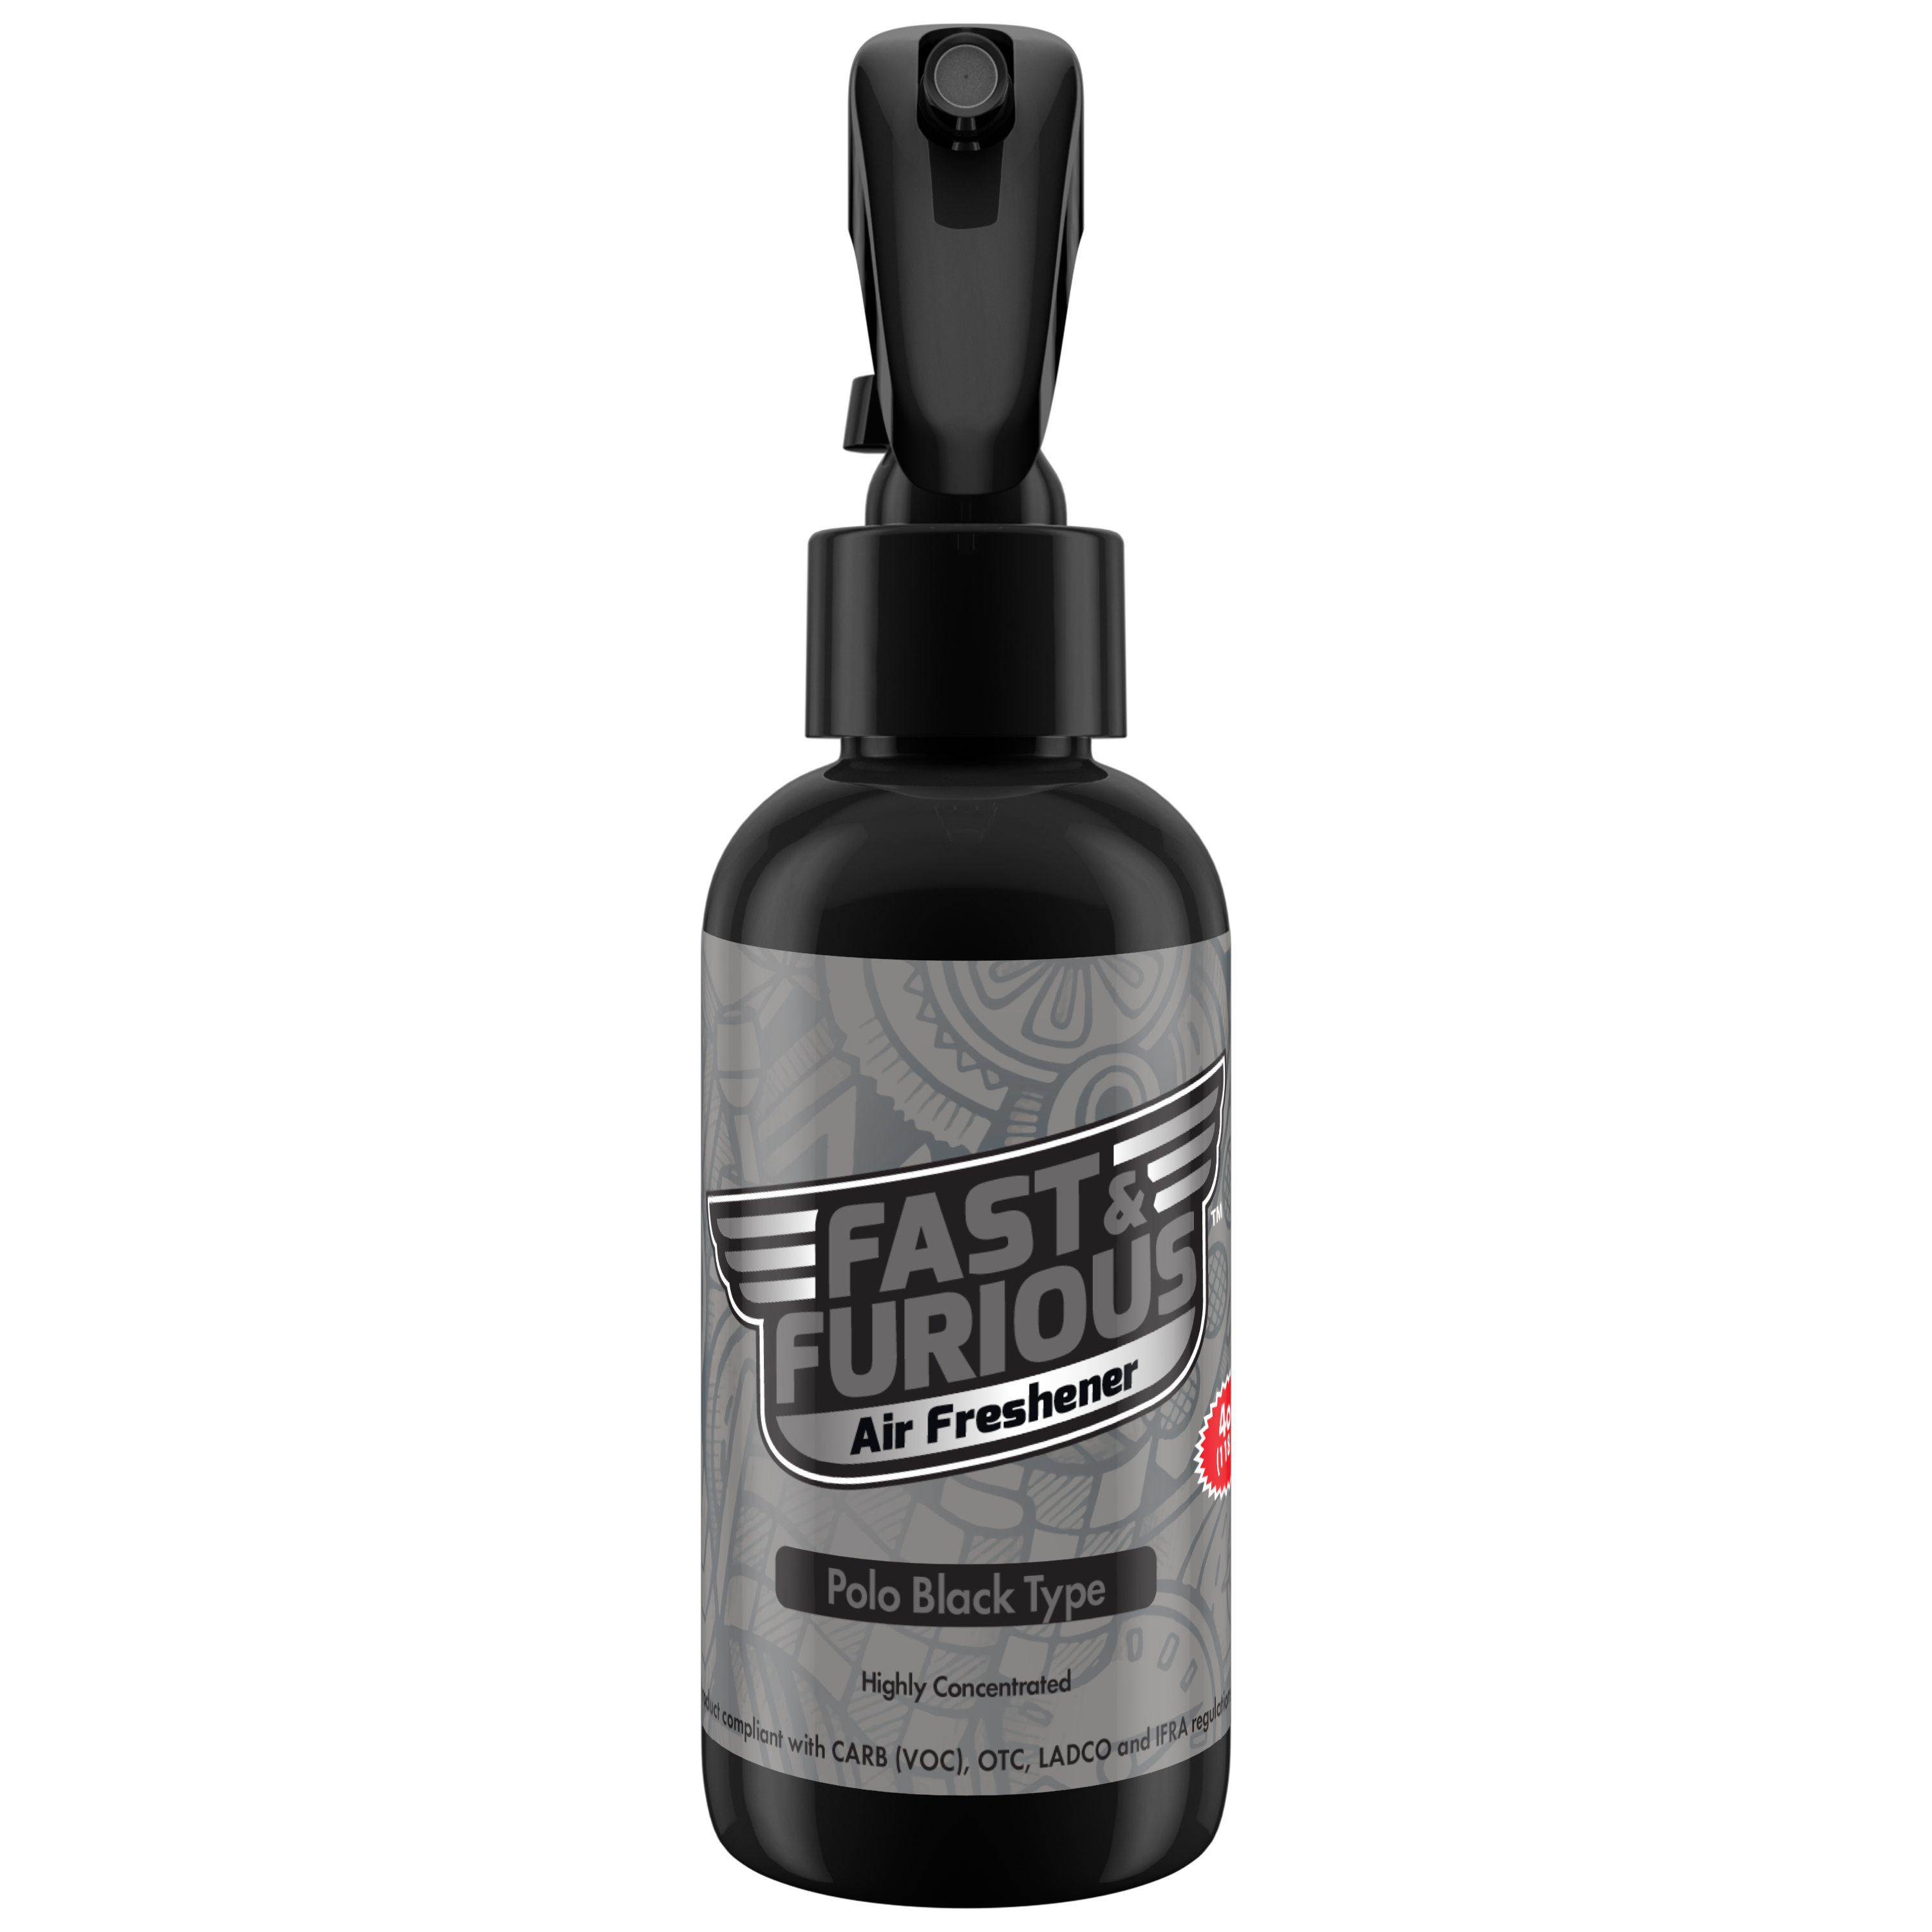 Fast and Furious Air Freshener - Polo Black Type